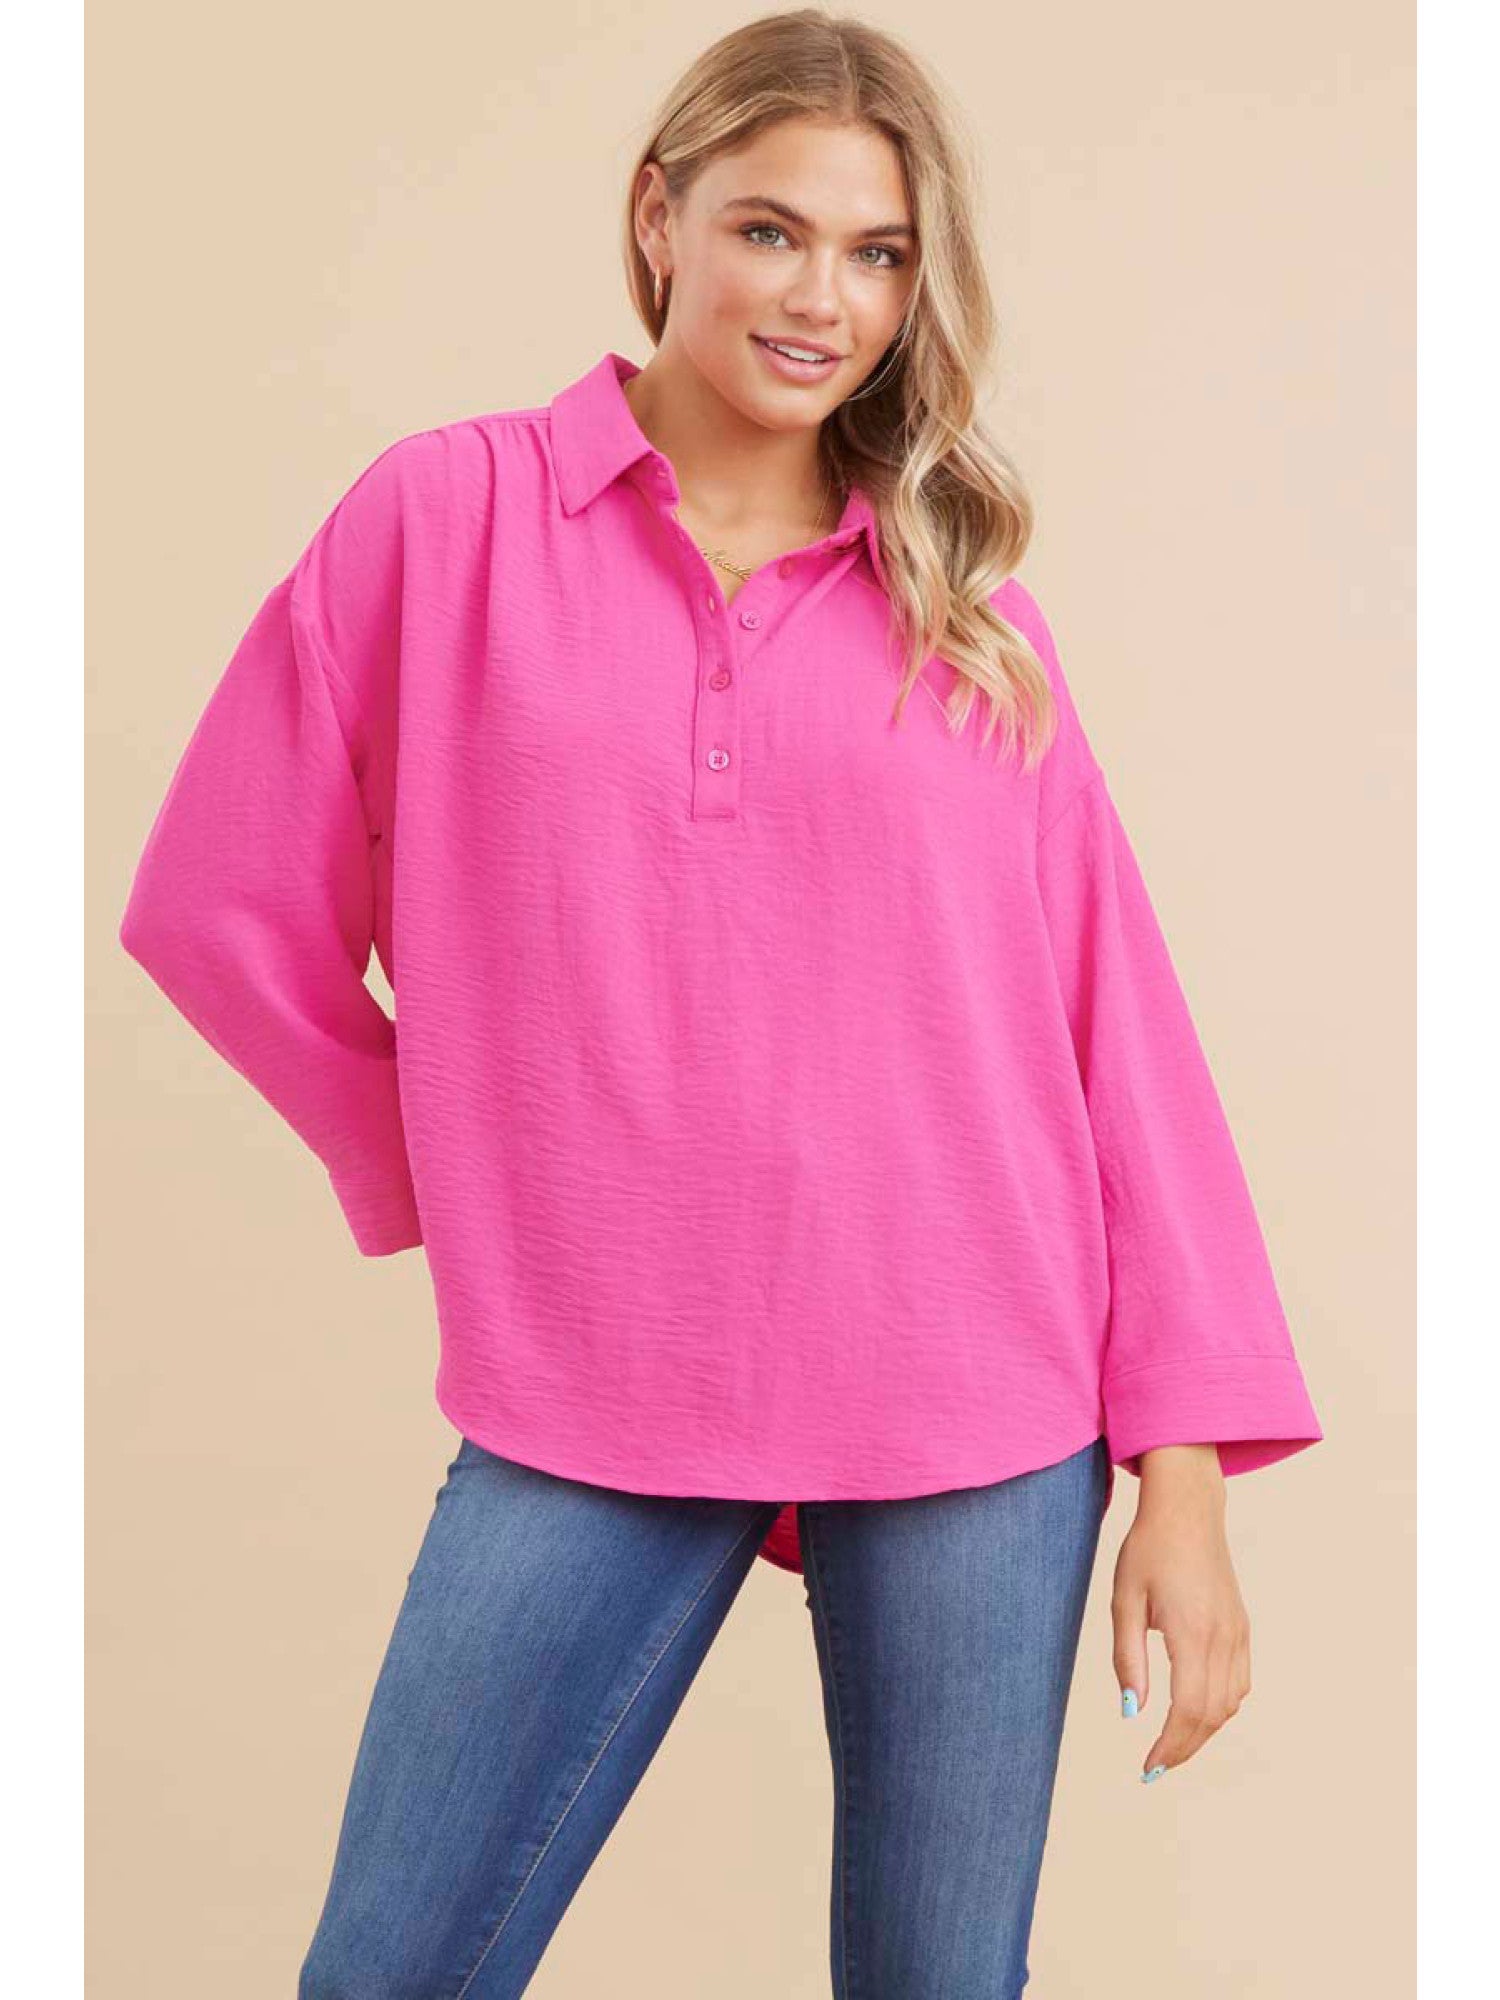 Hot Pink Bliss Top